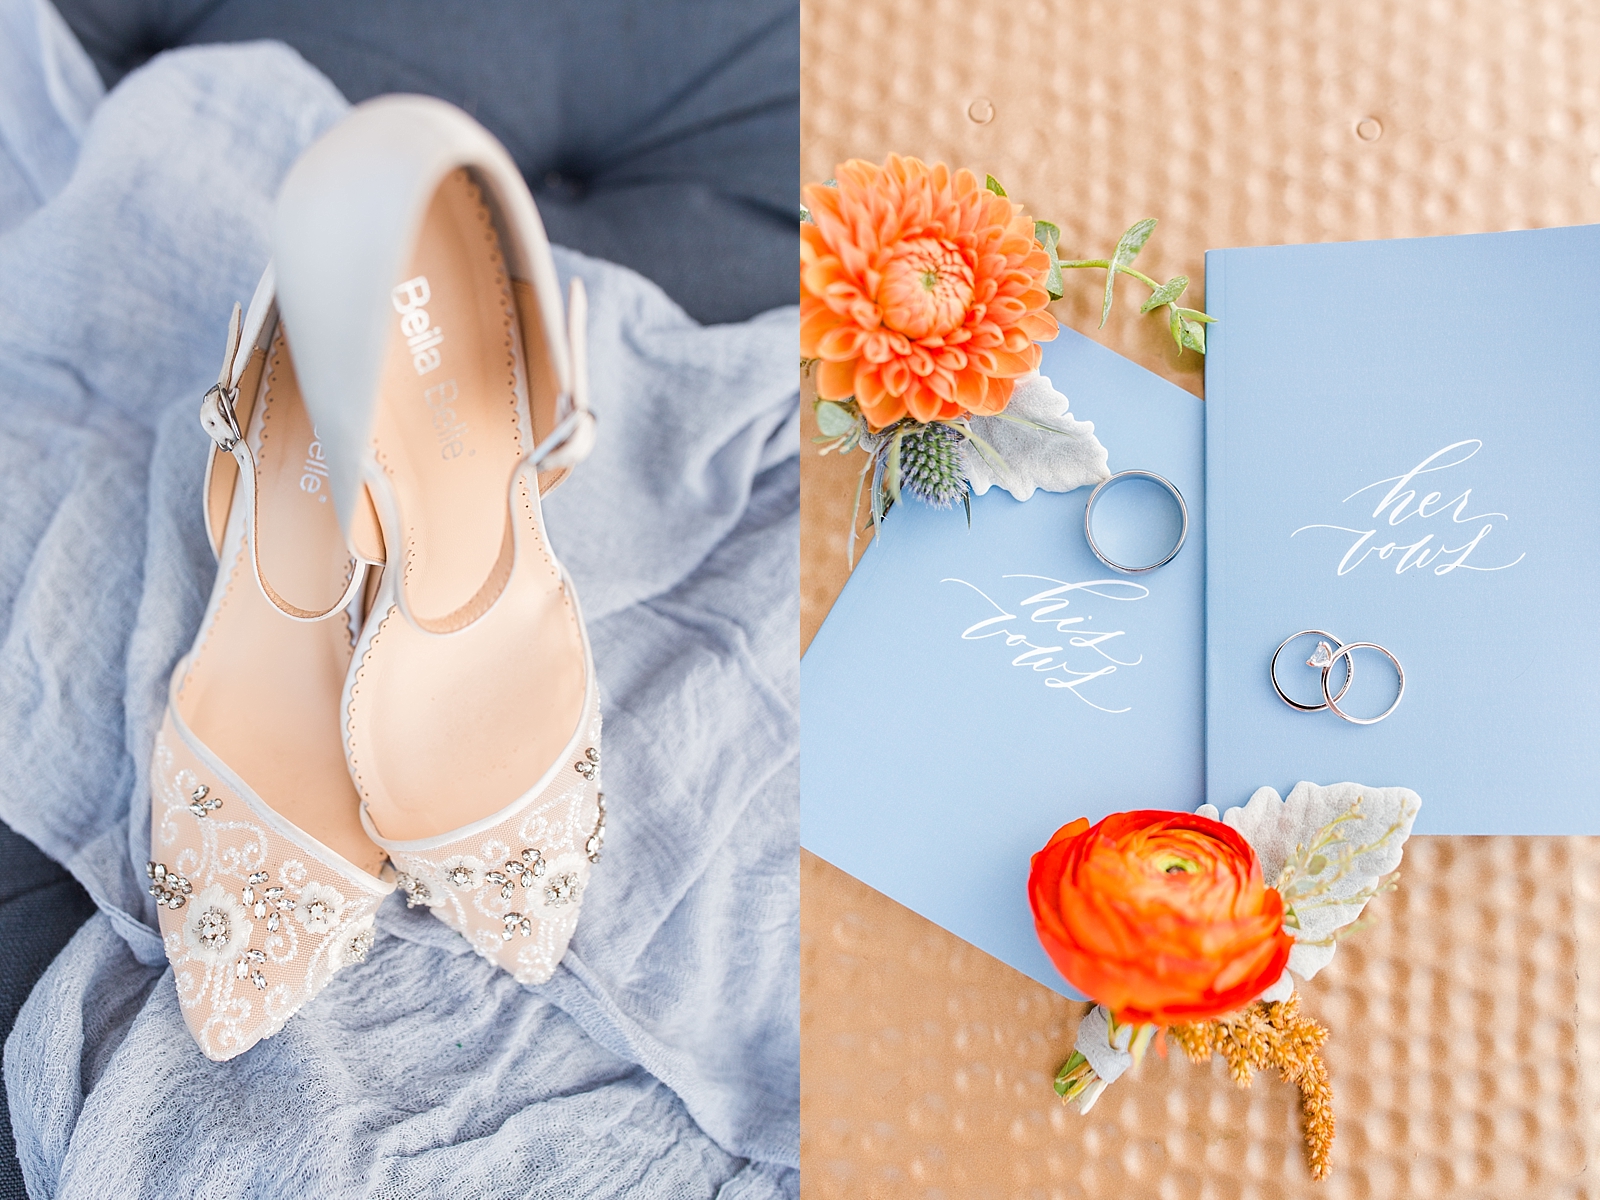 Chestnut Ridge Wedding bridal shoes on blue ottoman and vow books with wedding rings and orange blooms Photos